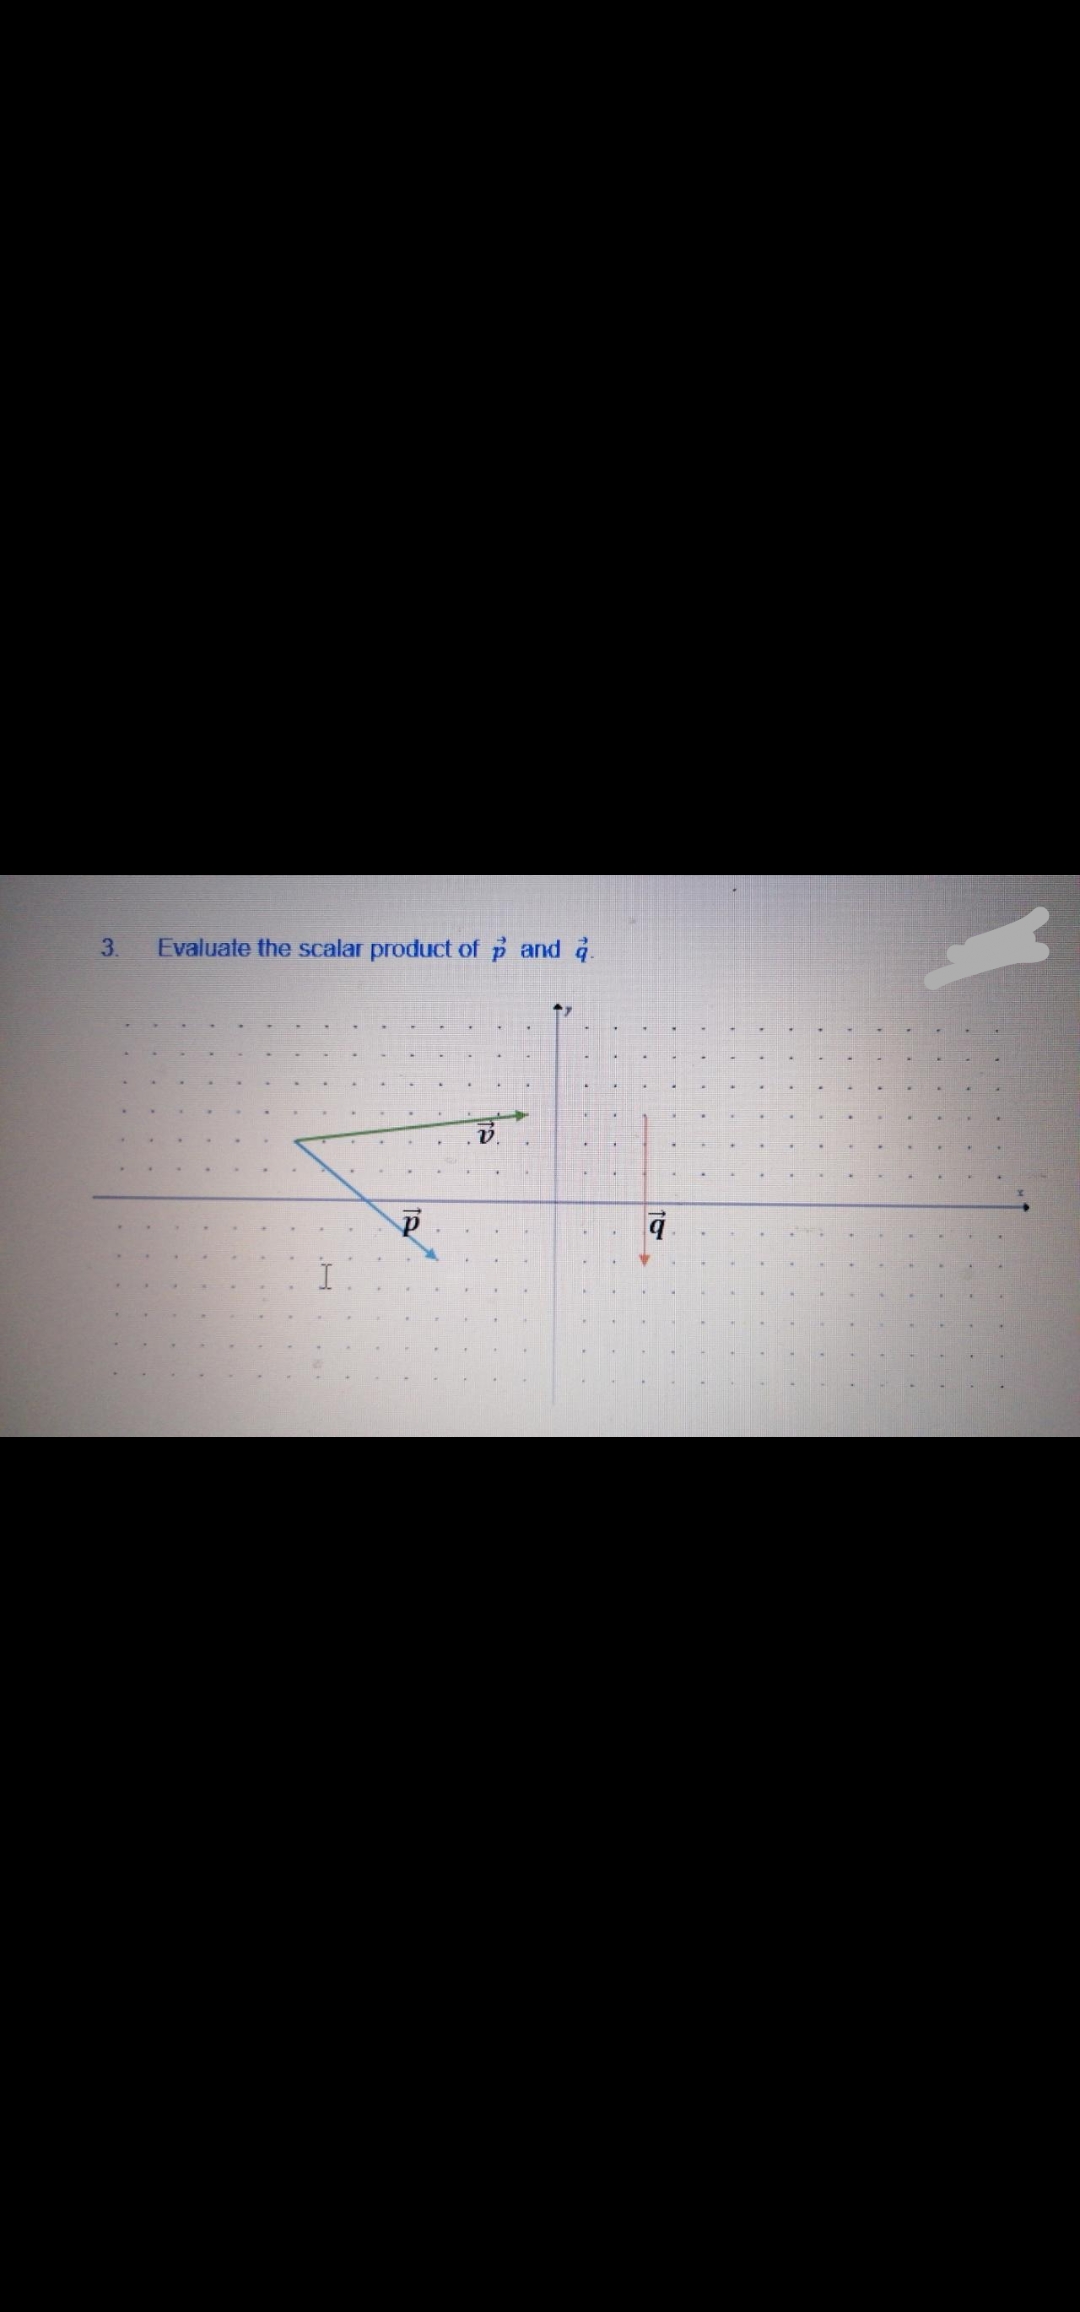 3.
Evaluate the scalar product of p and a.
